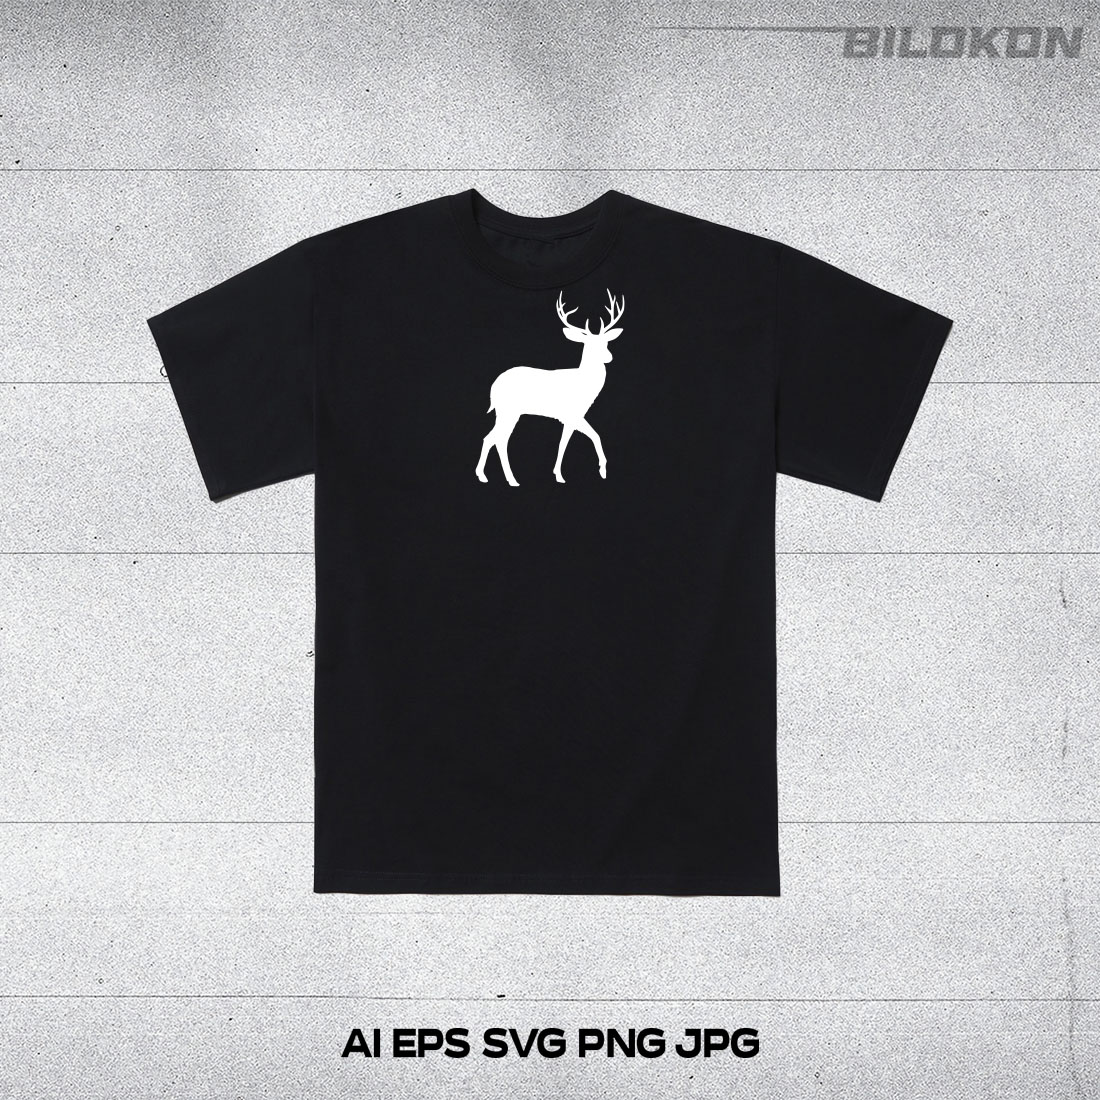 Black shirt with a white deer on it.